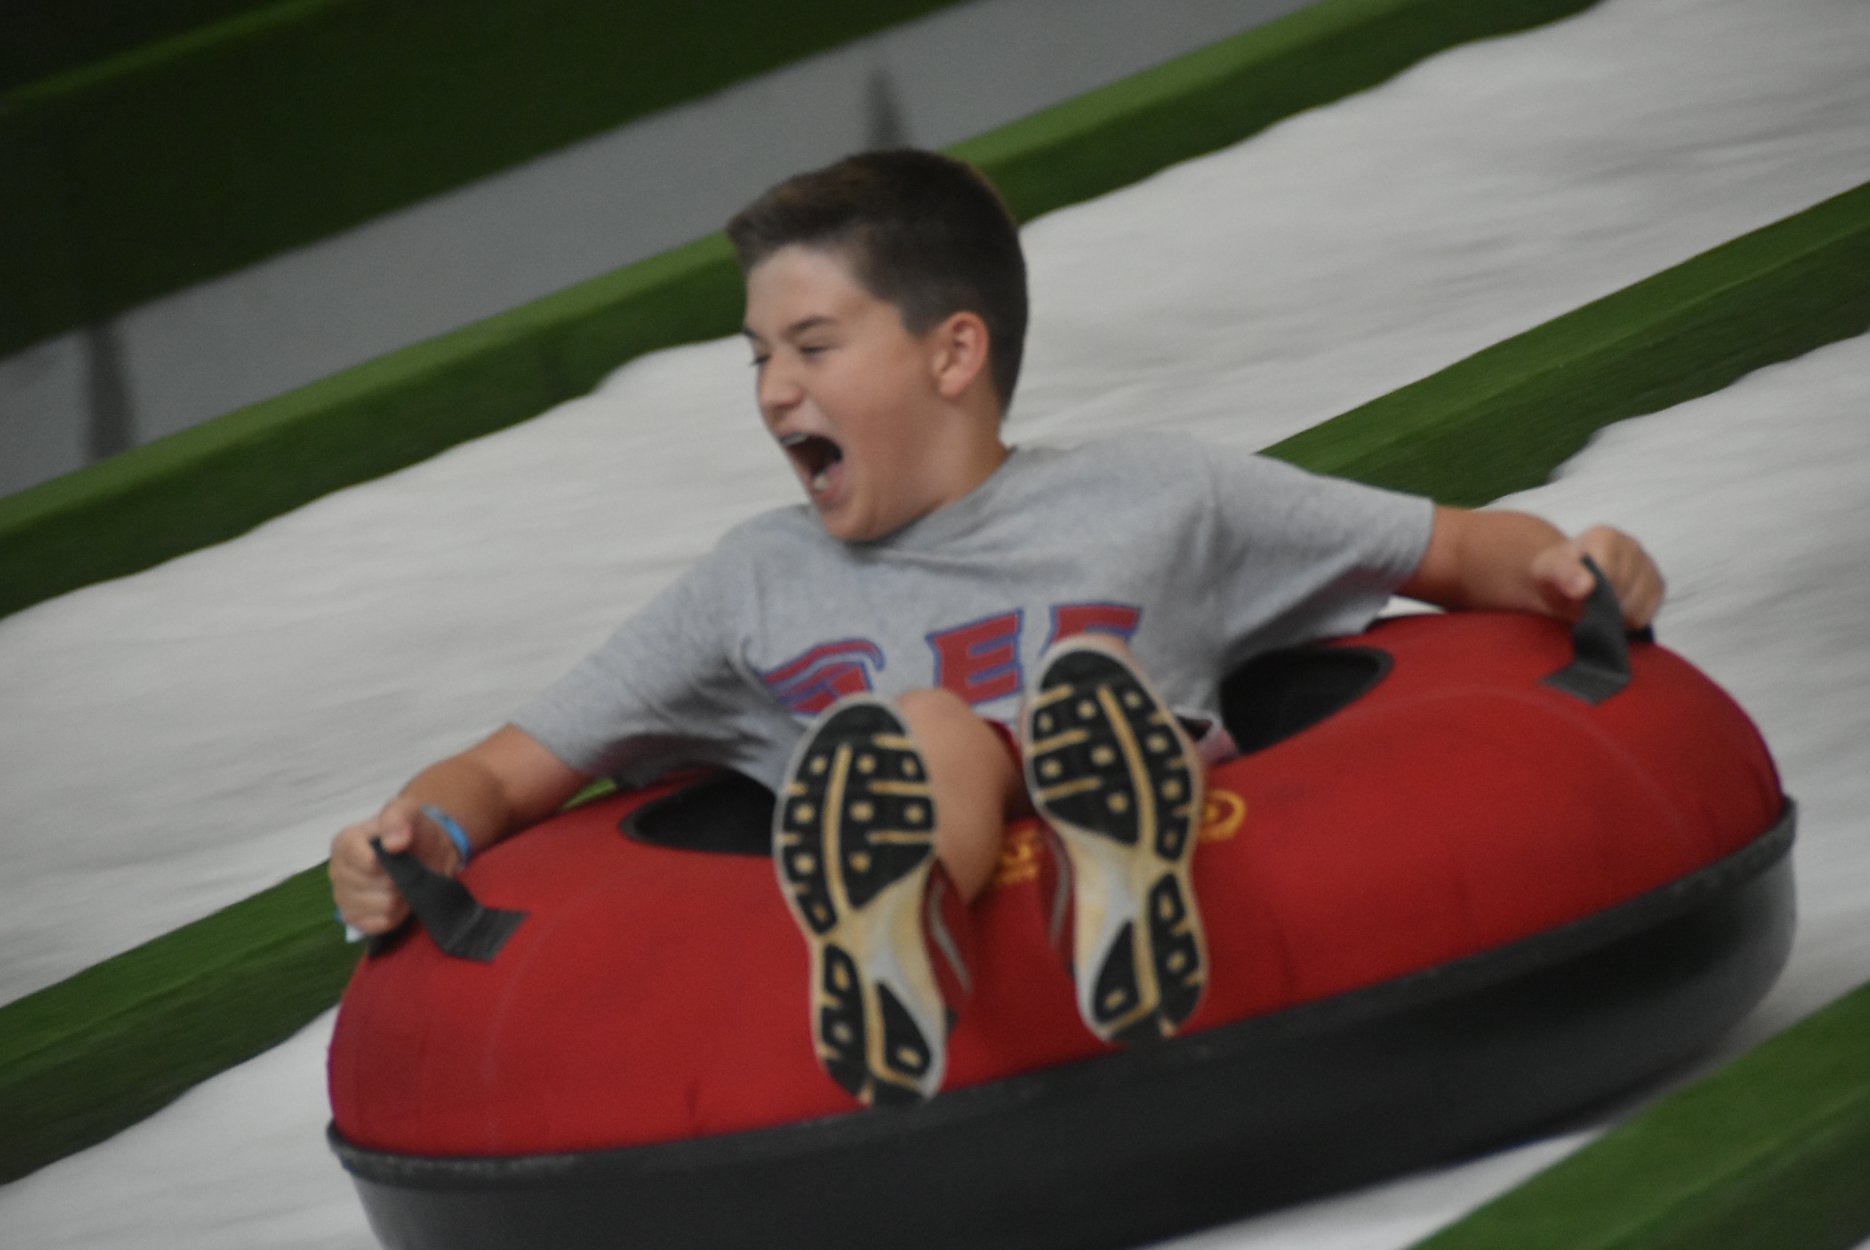 Pigeon Forge Snow boy tubing screaming with fun